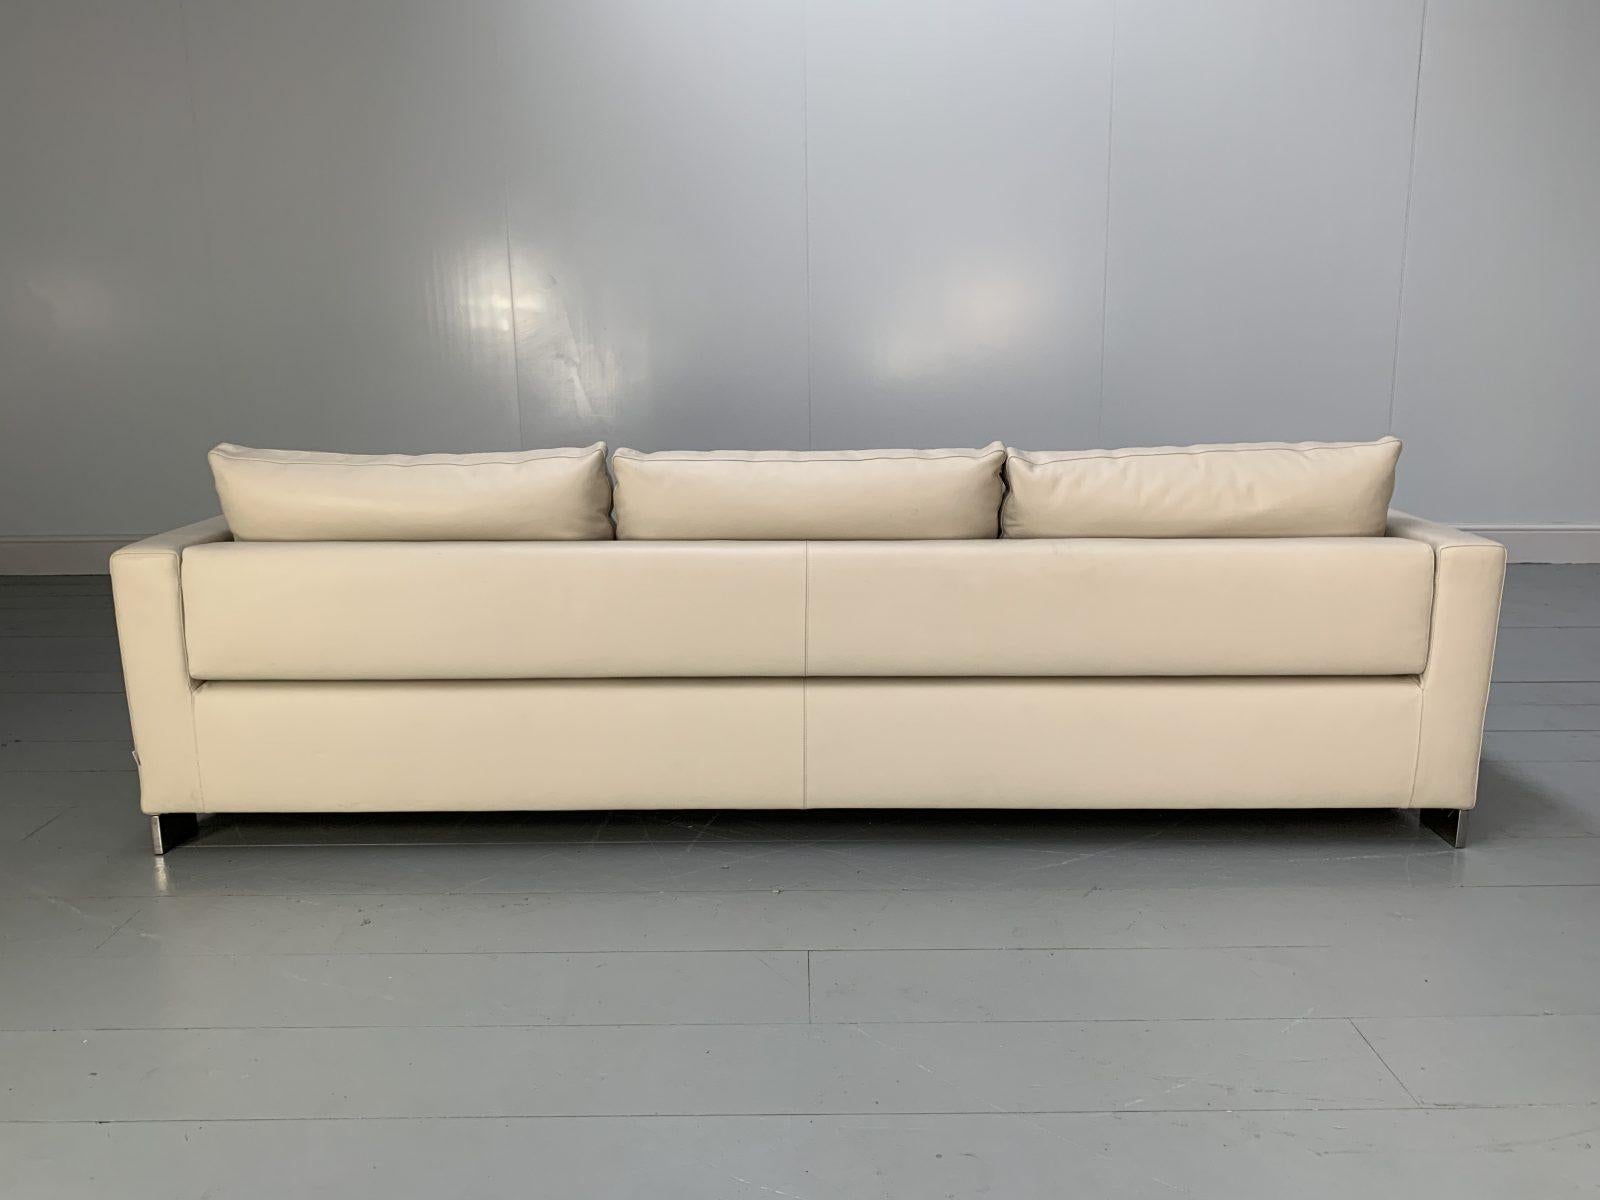 Rare Superb Molteni & C “Reversi” 3-Seat Sofa in Ivory Leather In Good Condition For Sale In Barrowford, GB